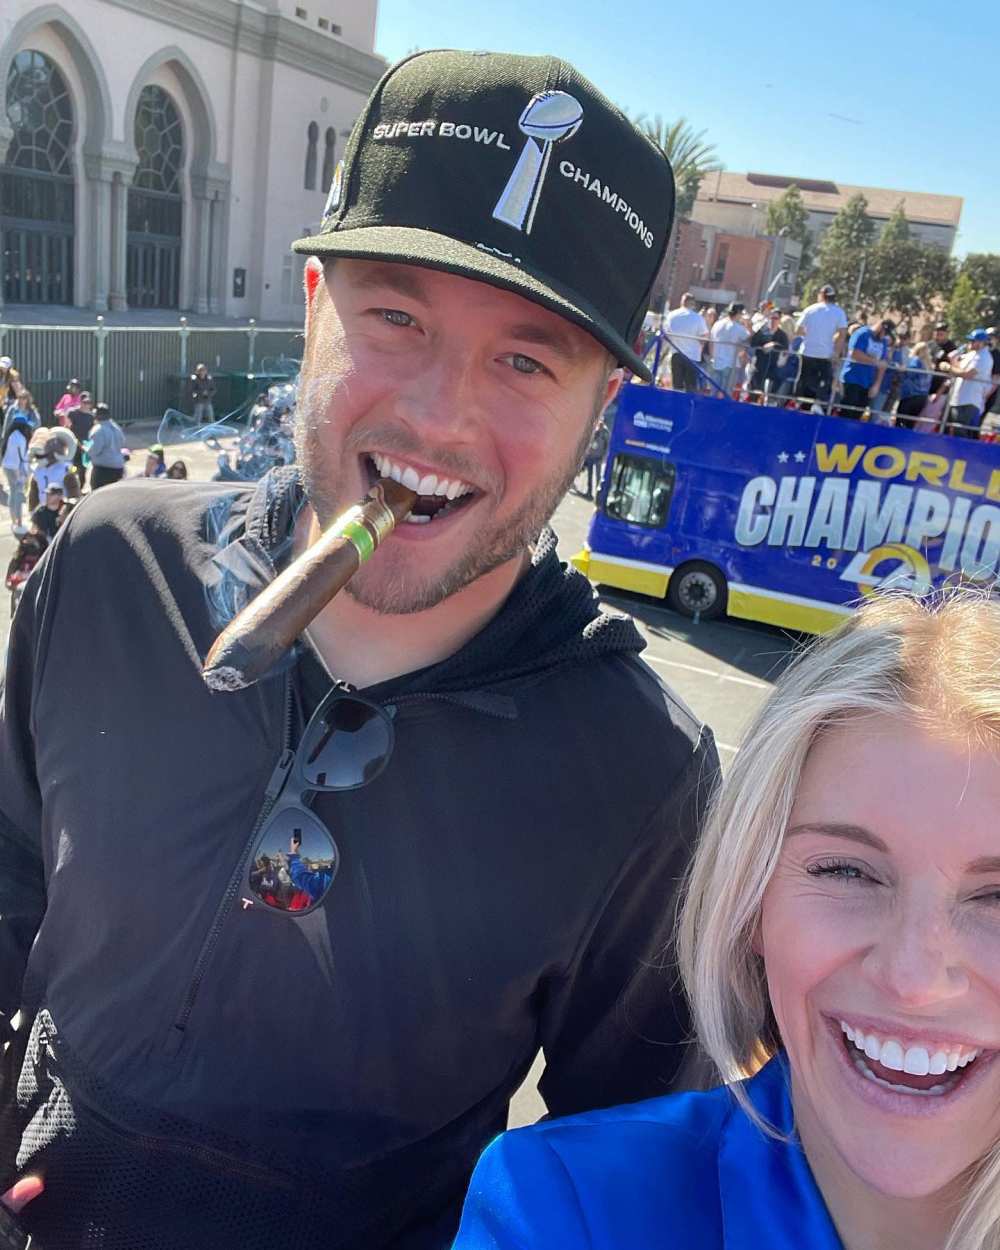 Matthew and Kelly Stafford Speak Out After Viral Video of Woman Falling at Rams Parade